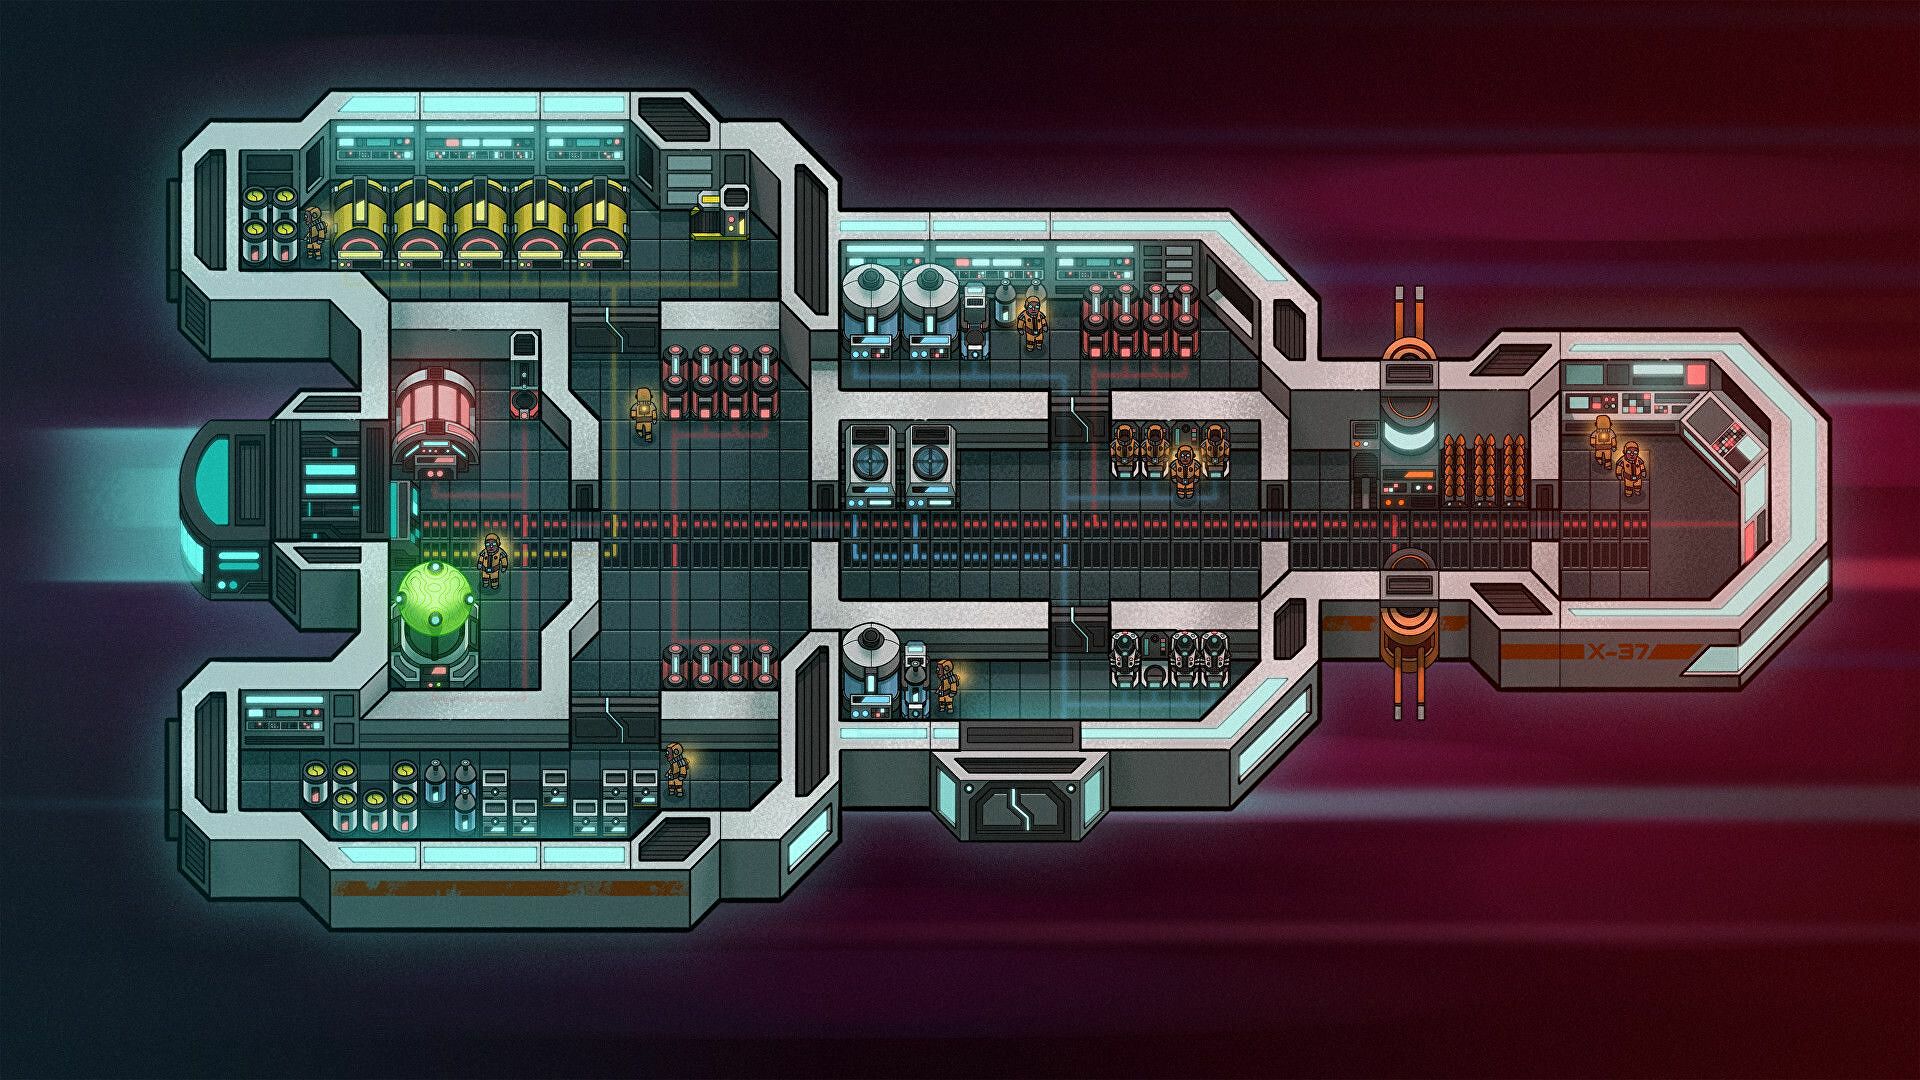 Prison Architect devs finally make it to space with The Last Starship